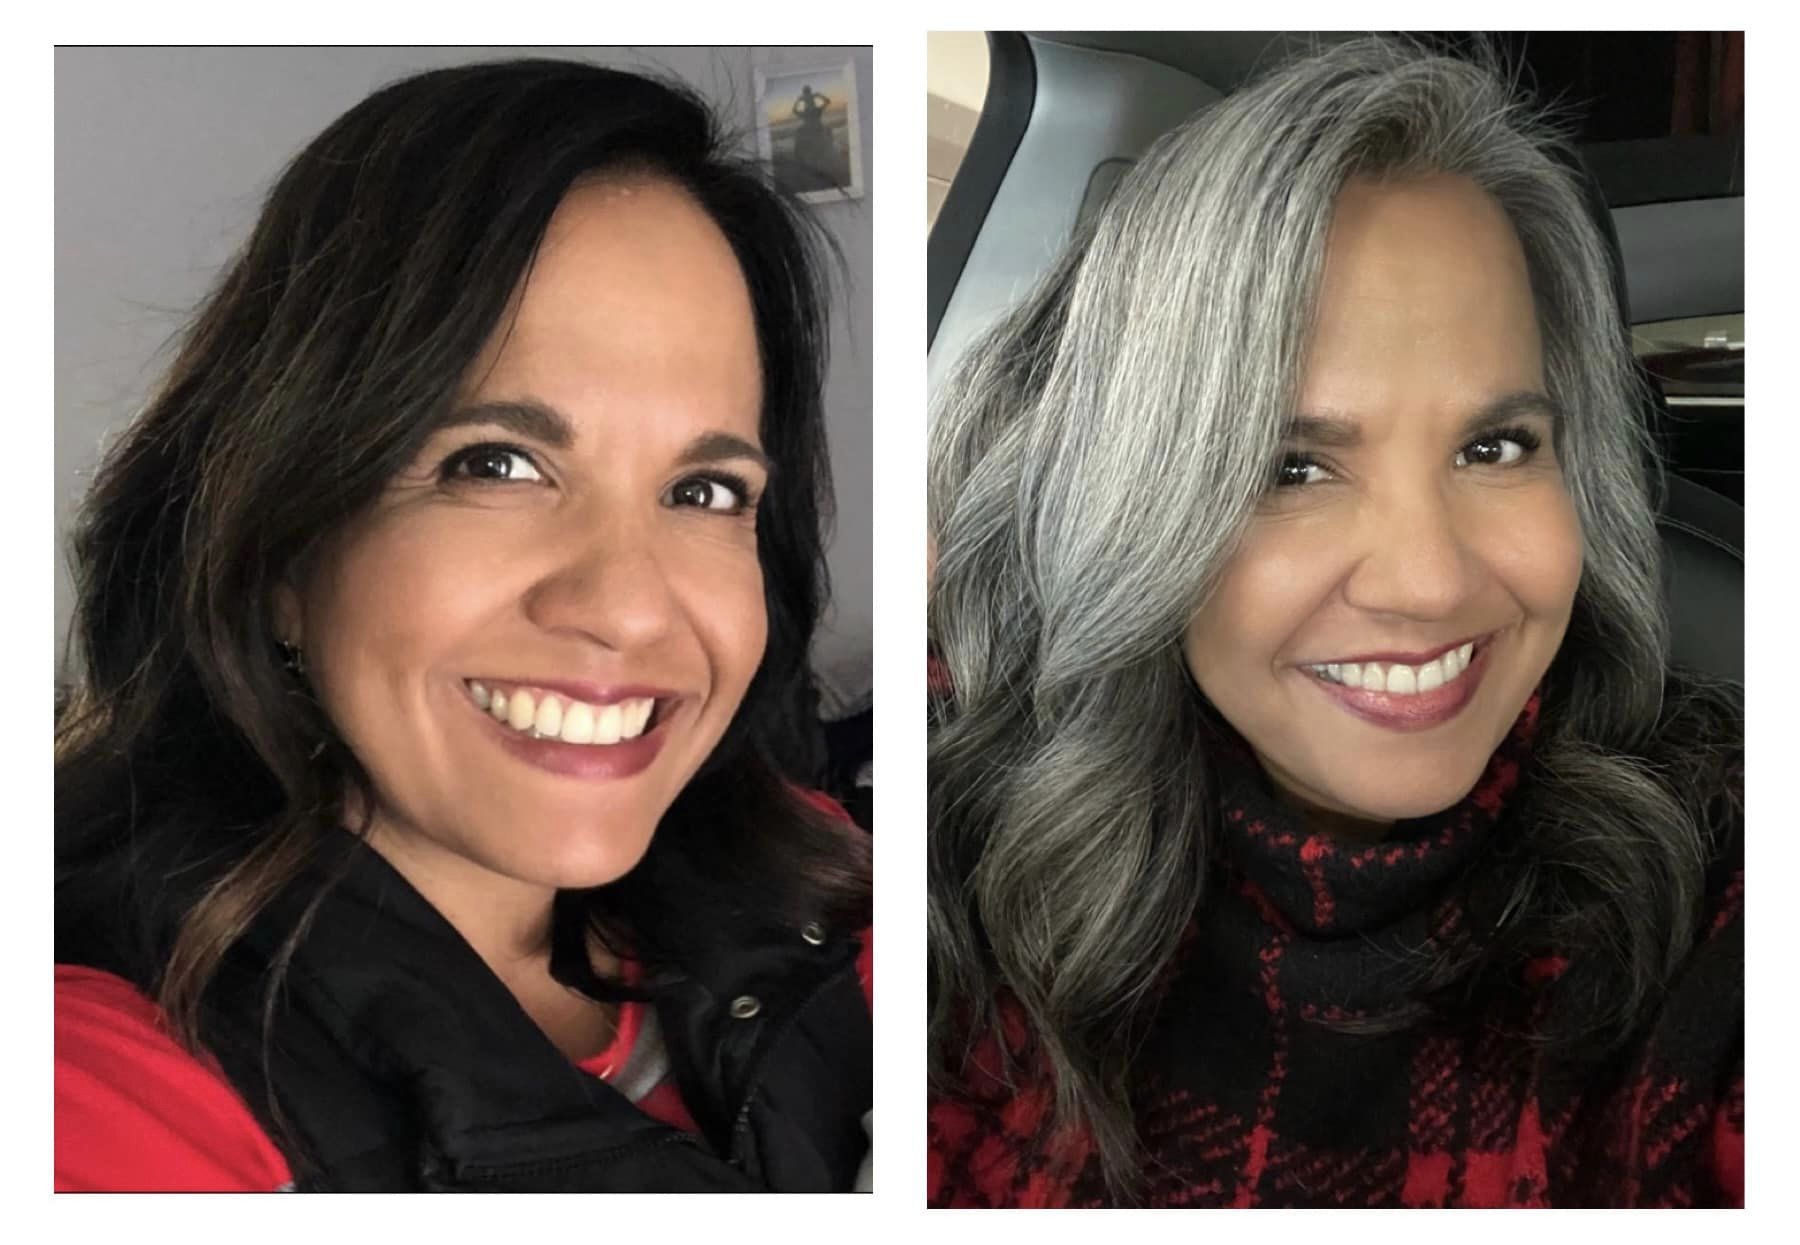 Side by side of a woman with dyed hair vs gray hair.